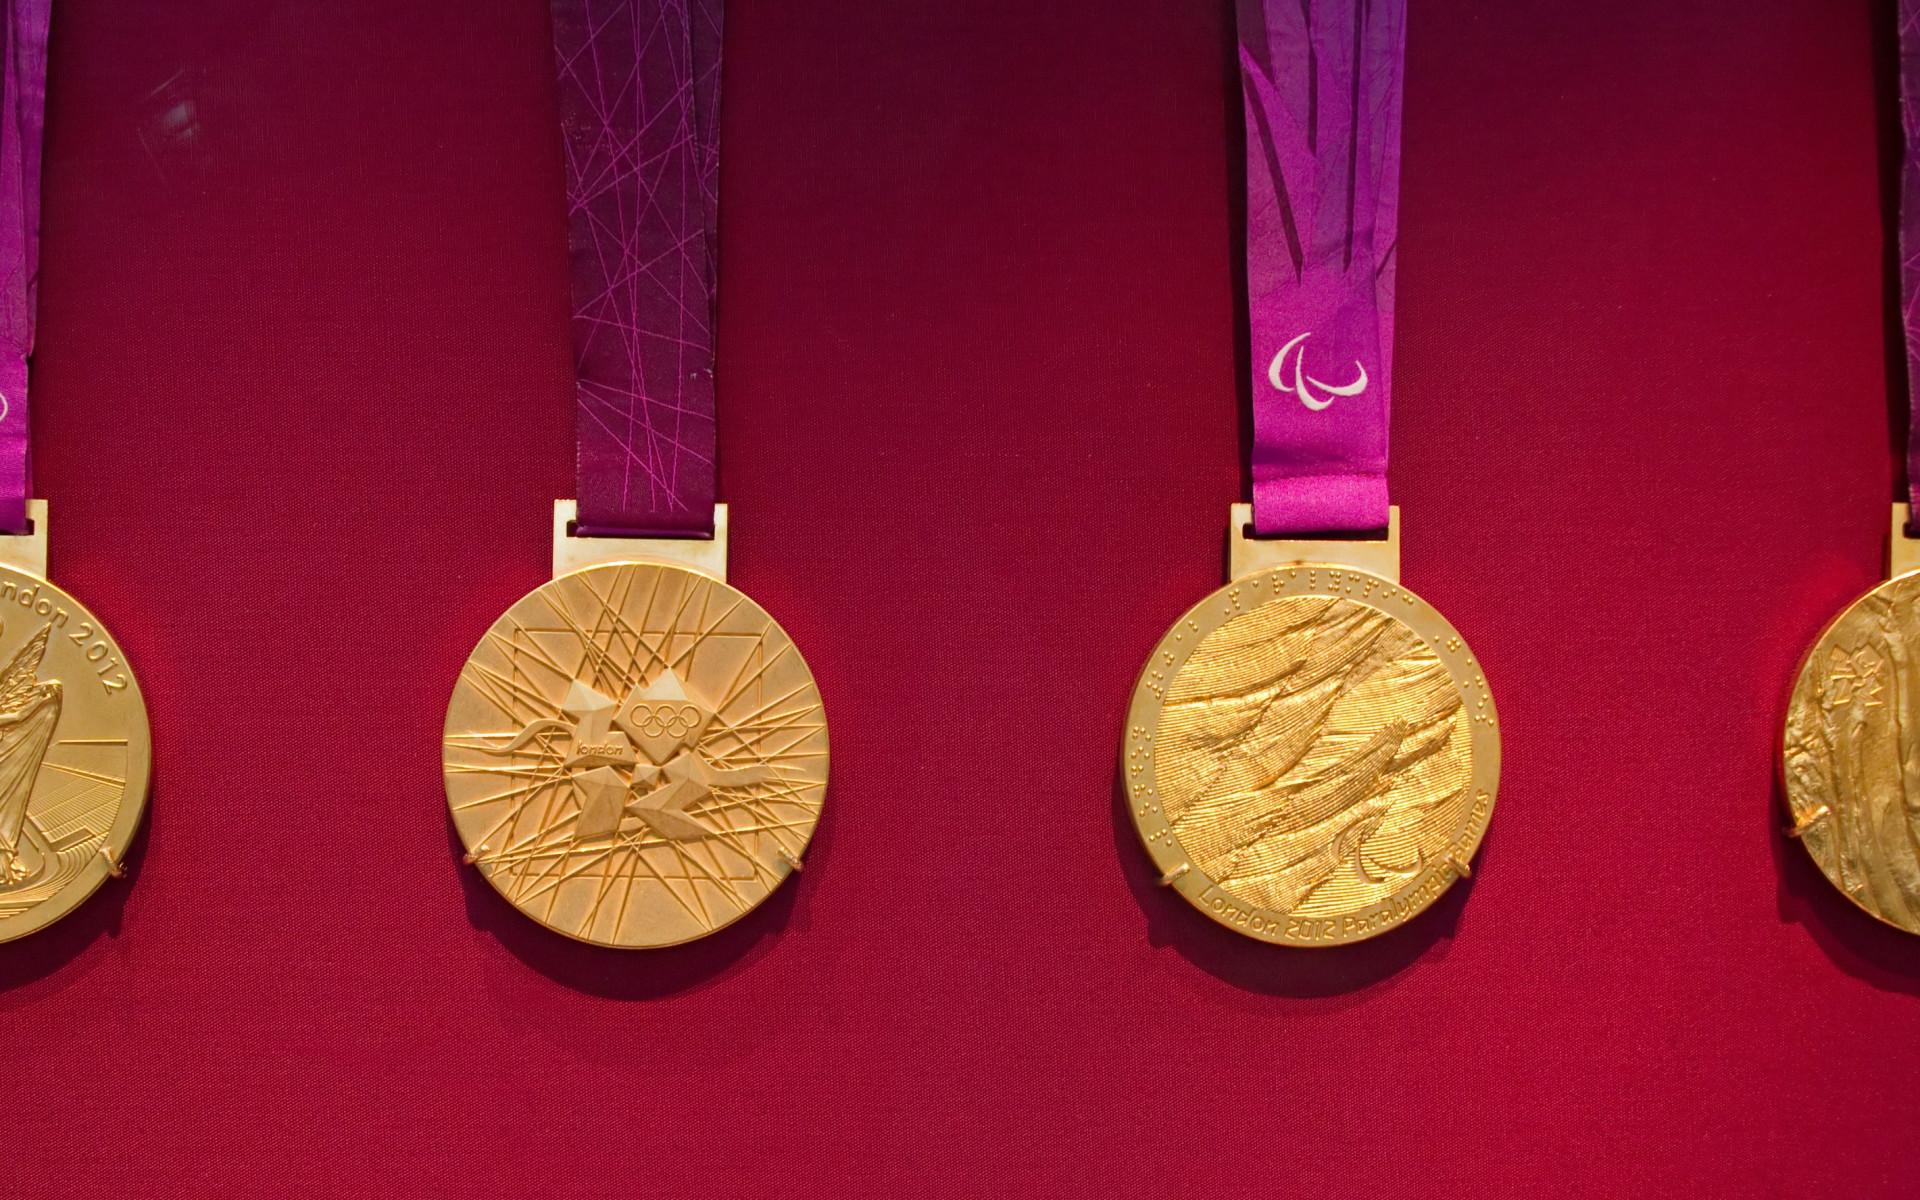 Gold medal Images - Search Images on Everypixel